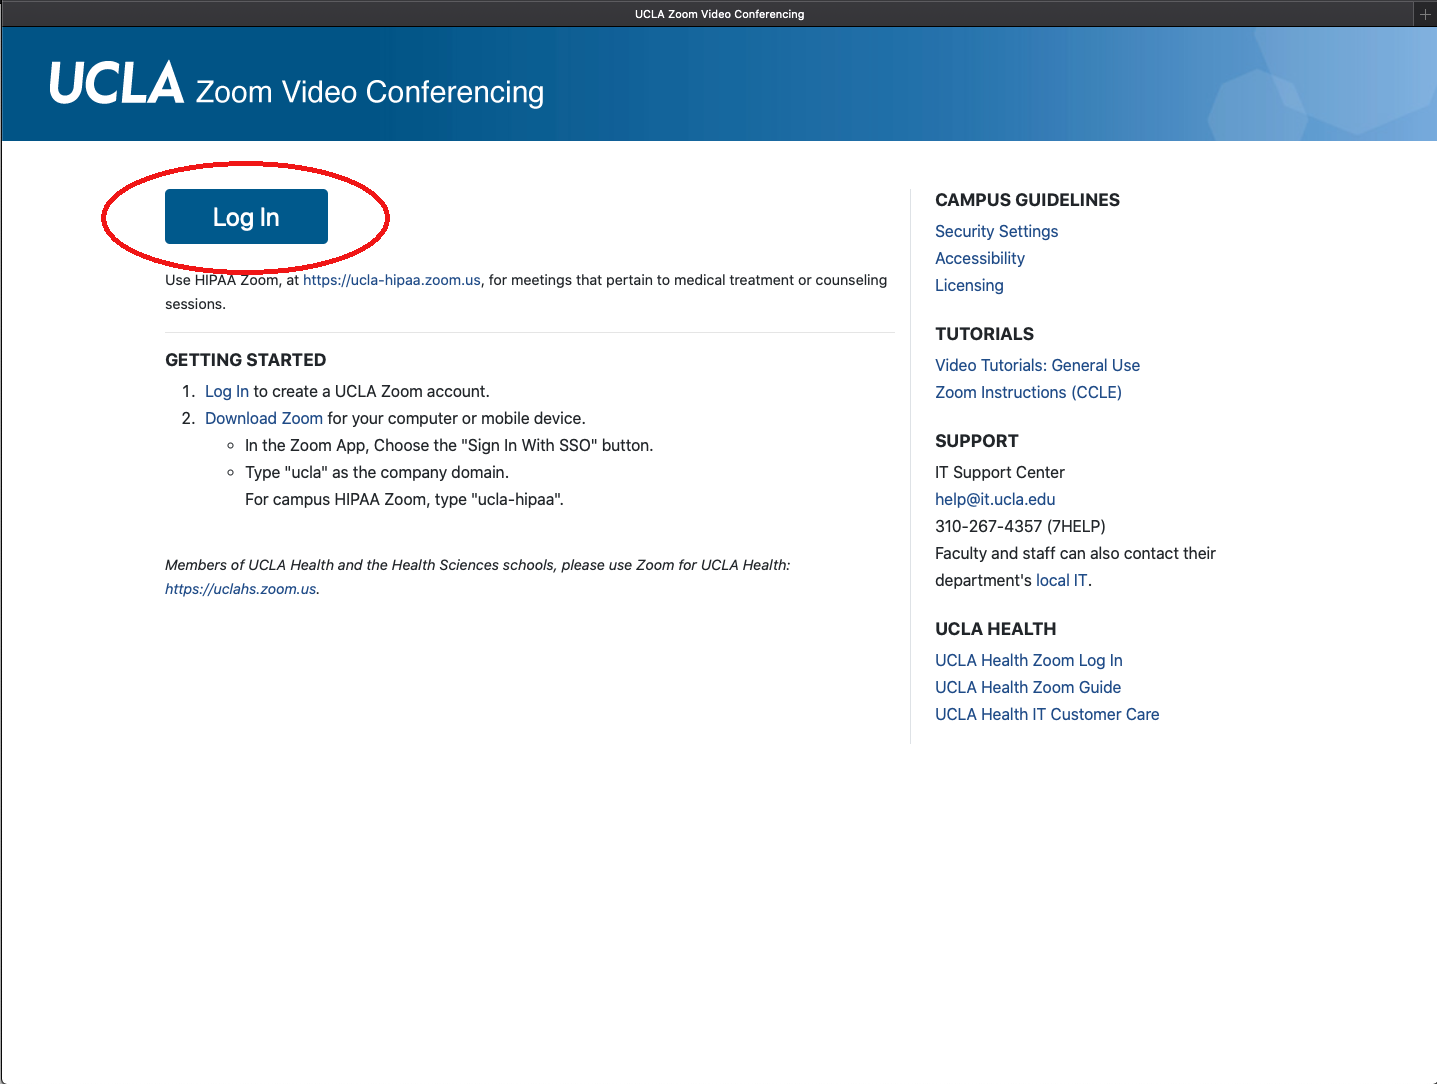 Login to Zoom at ucla.zoom.us